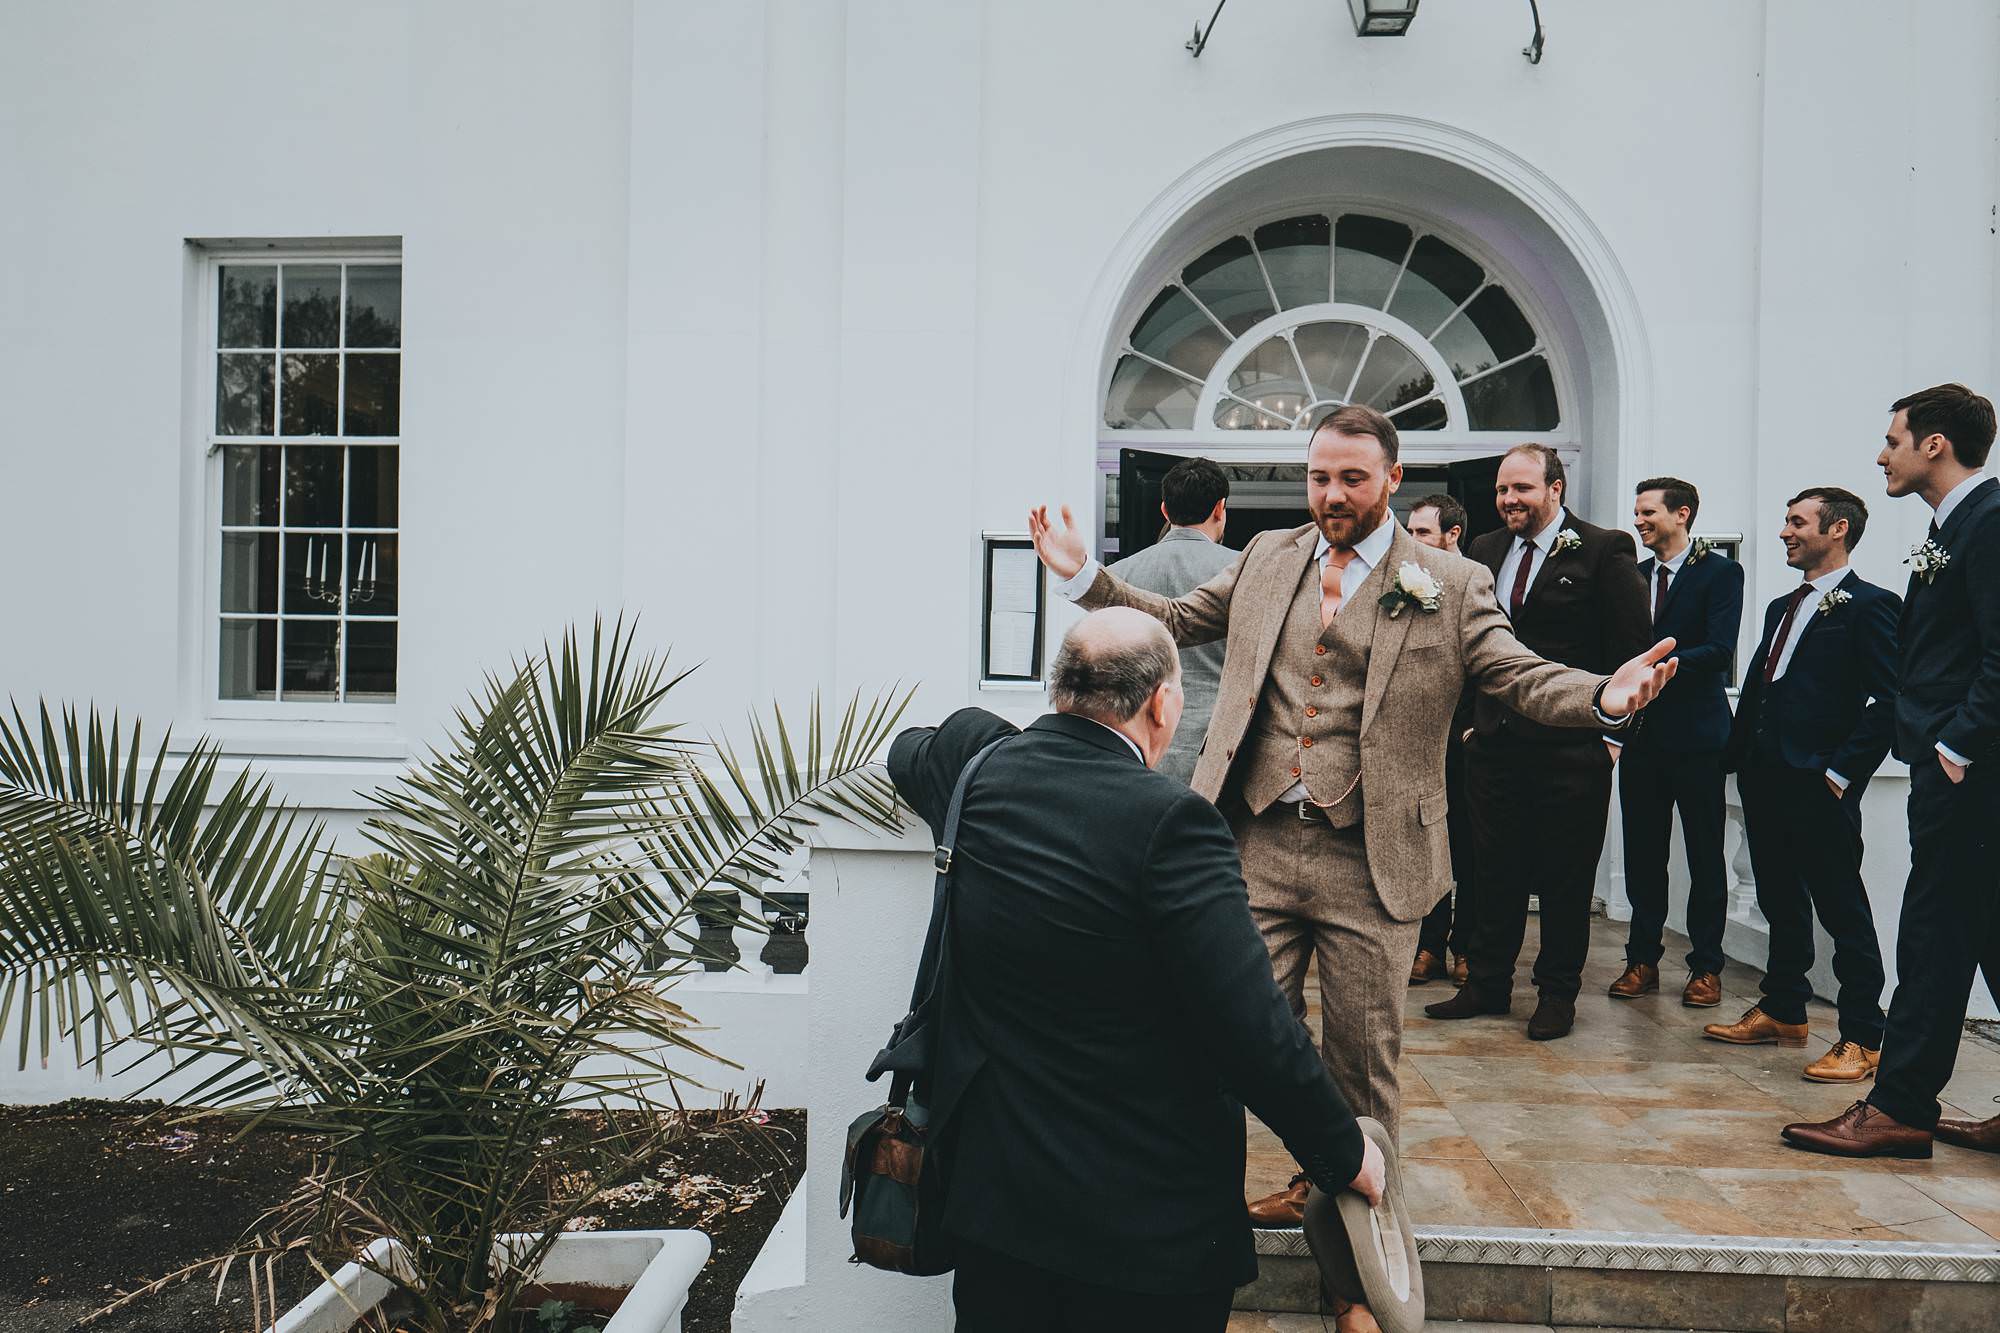 Wedding at Belair House and The Lordship Pub